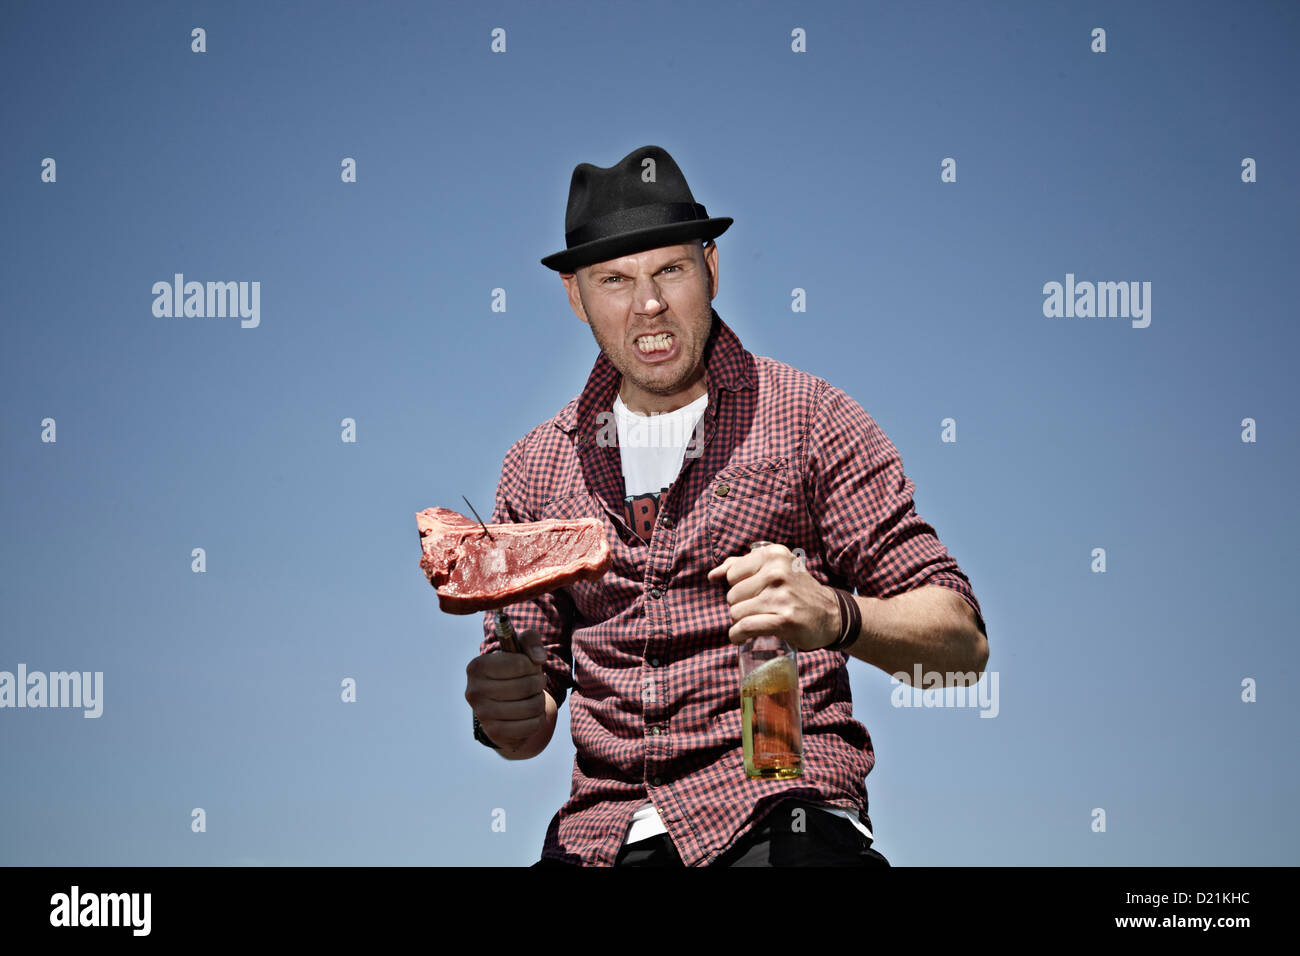 Germany, Cologne, Mature man with meat and beer Stock Photo